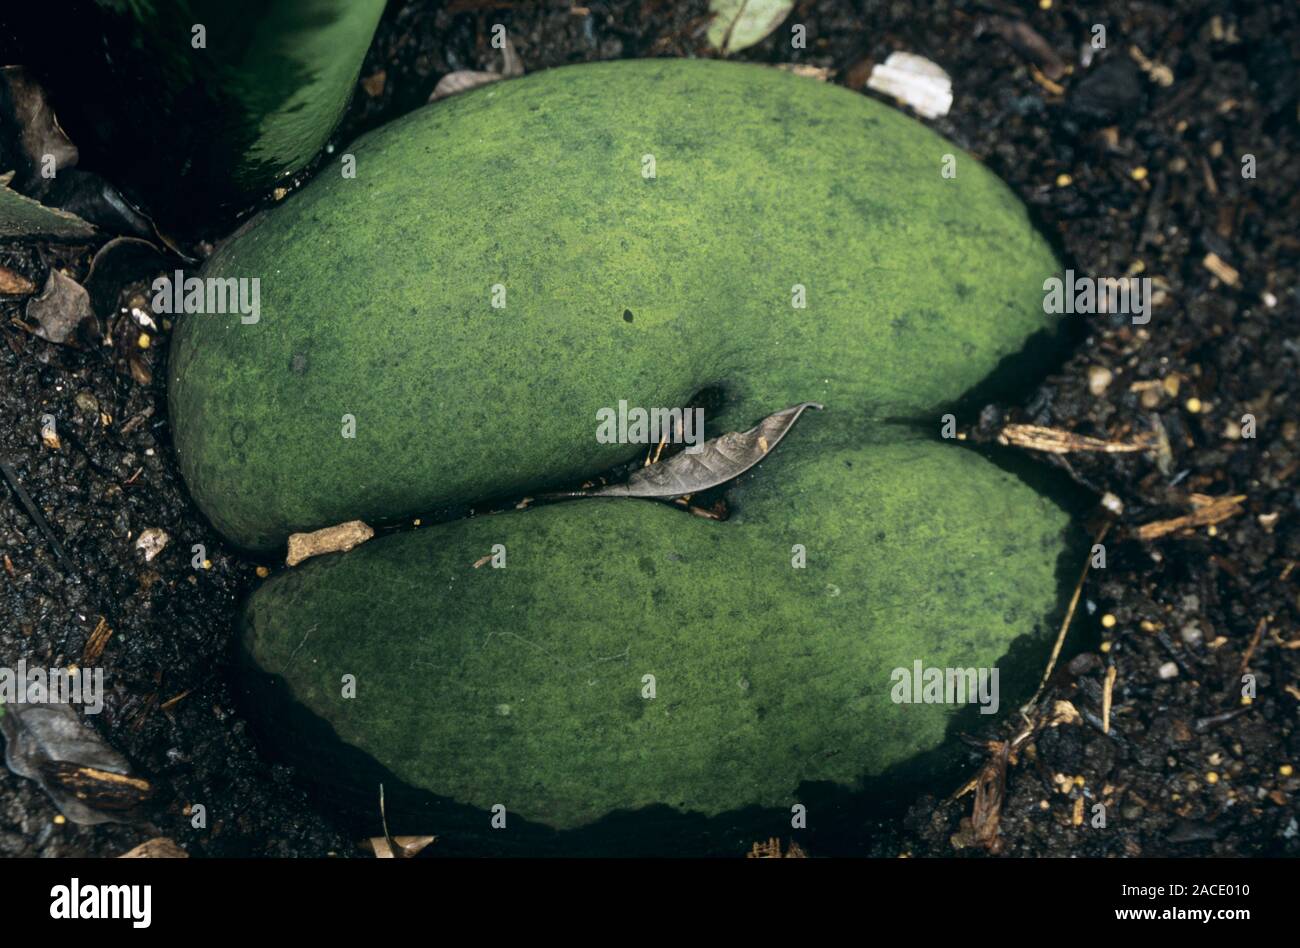 Coco de mer seed (Lodoicea maldivica). This is the largest and heaviest ...